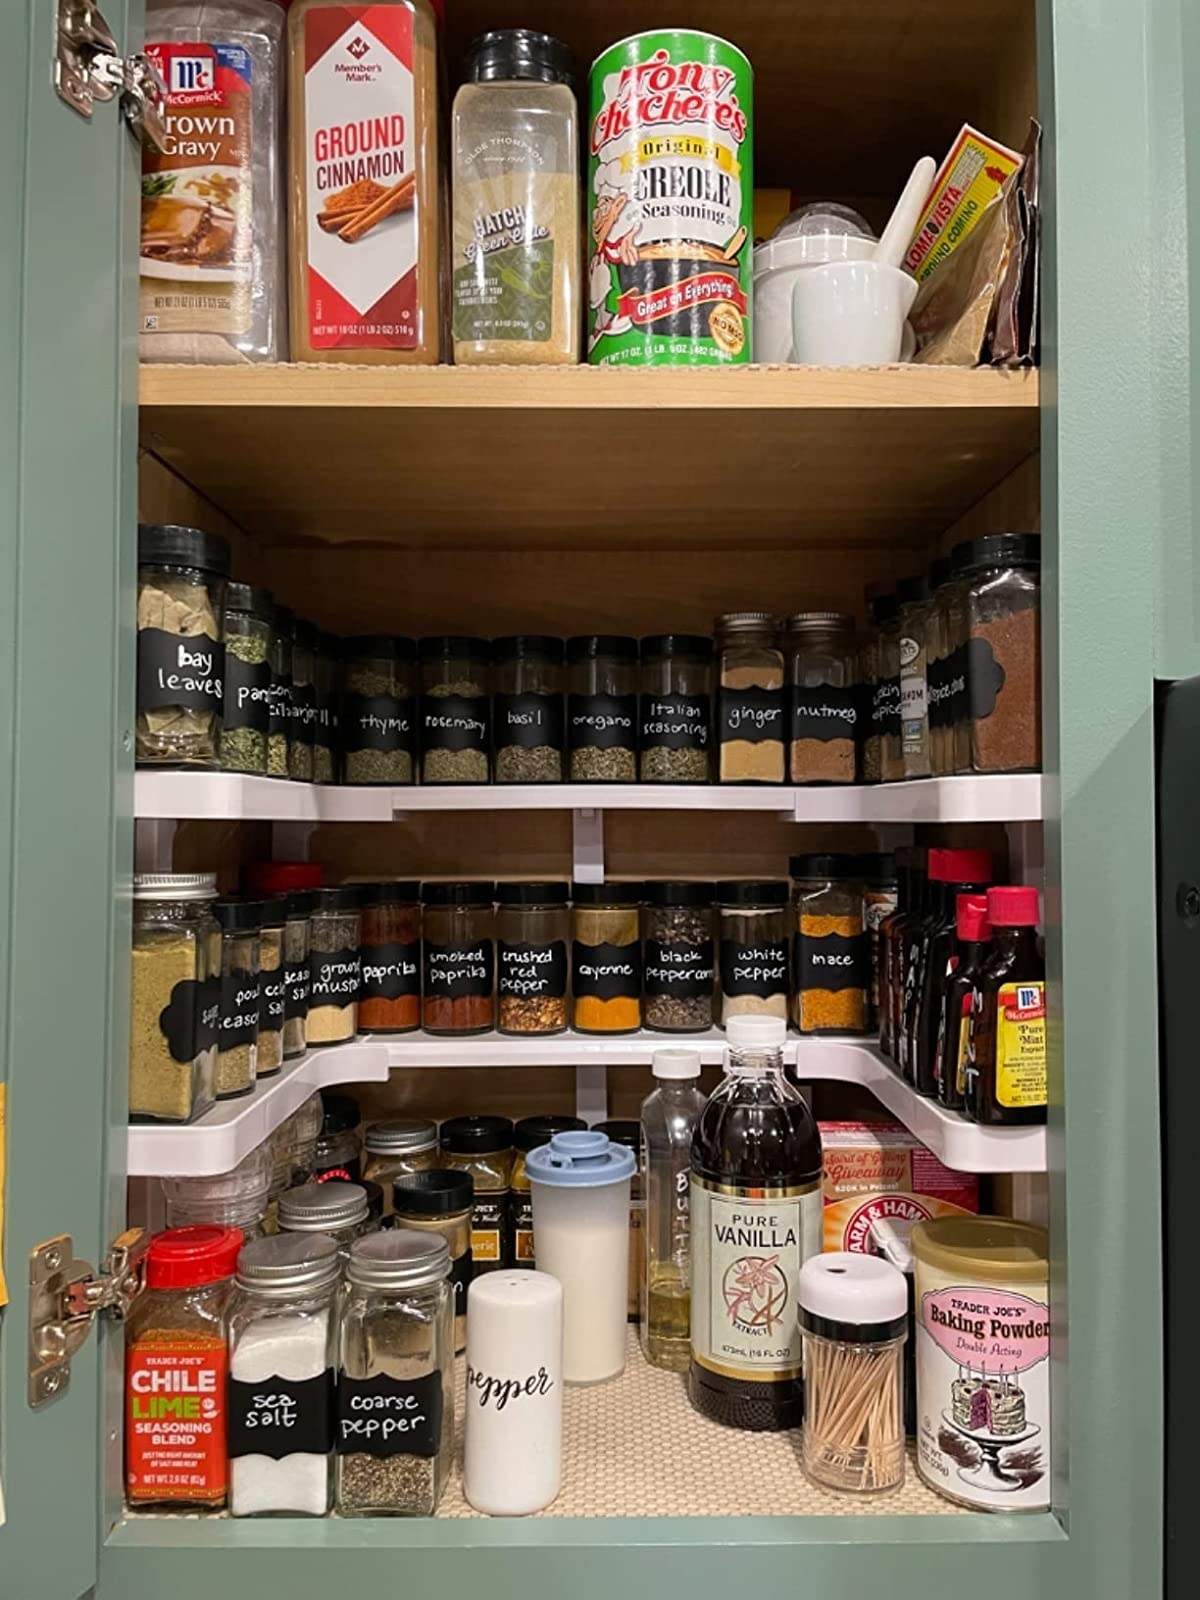 reviewr photo of the shelving system used to organize a spice cabinet